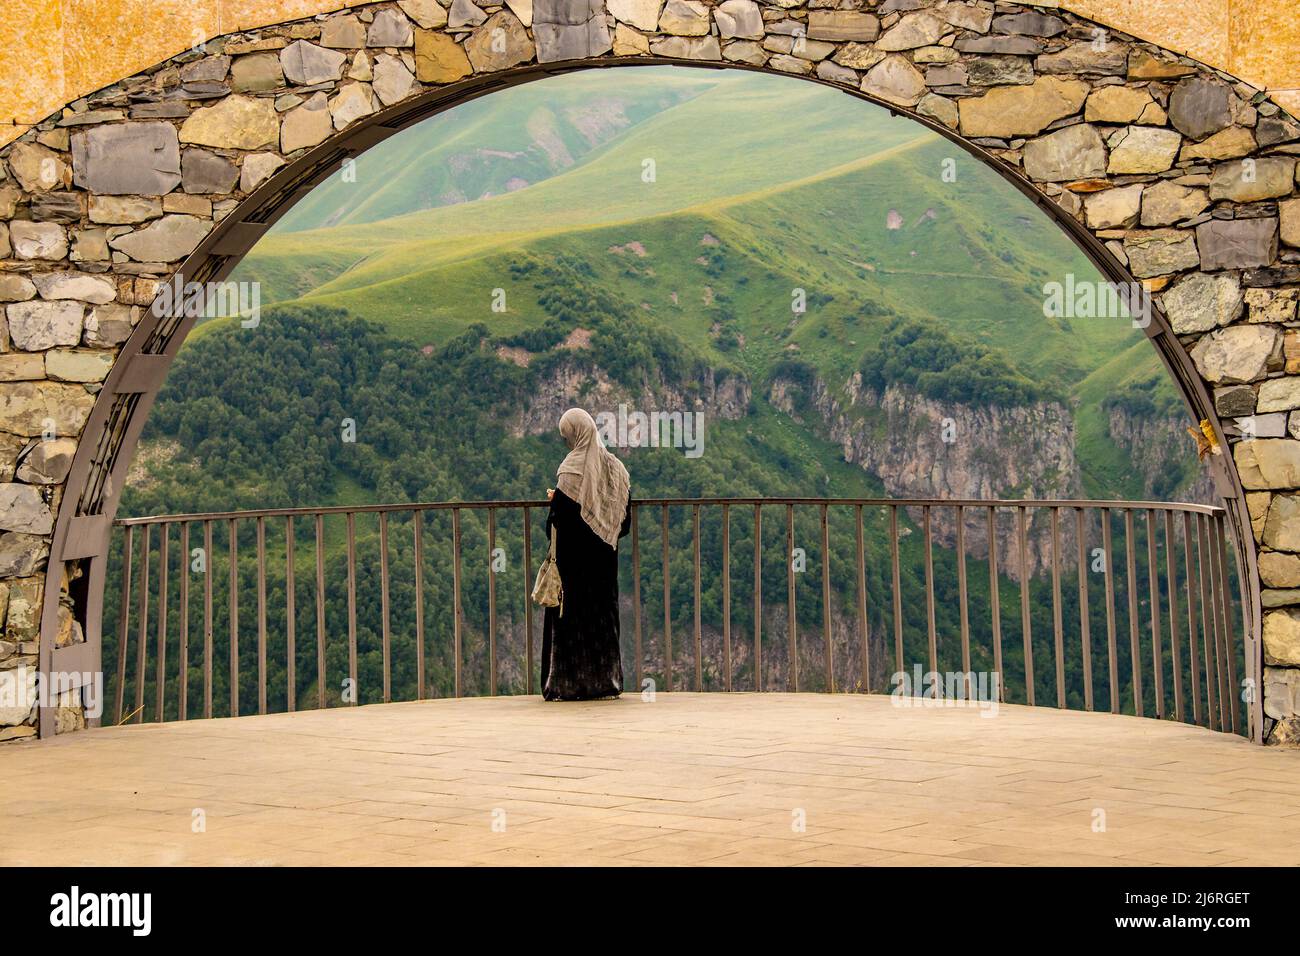 Female tourist in Abaya and Hijāb checks phone standing in arch of Georgia Friendship Monument on Military Highway with beautiful mountain view behind Stock Photo